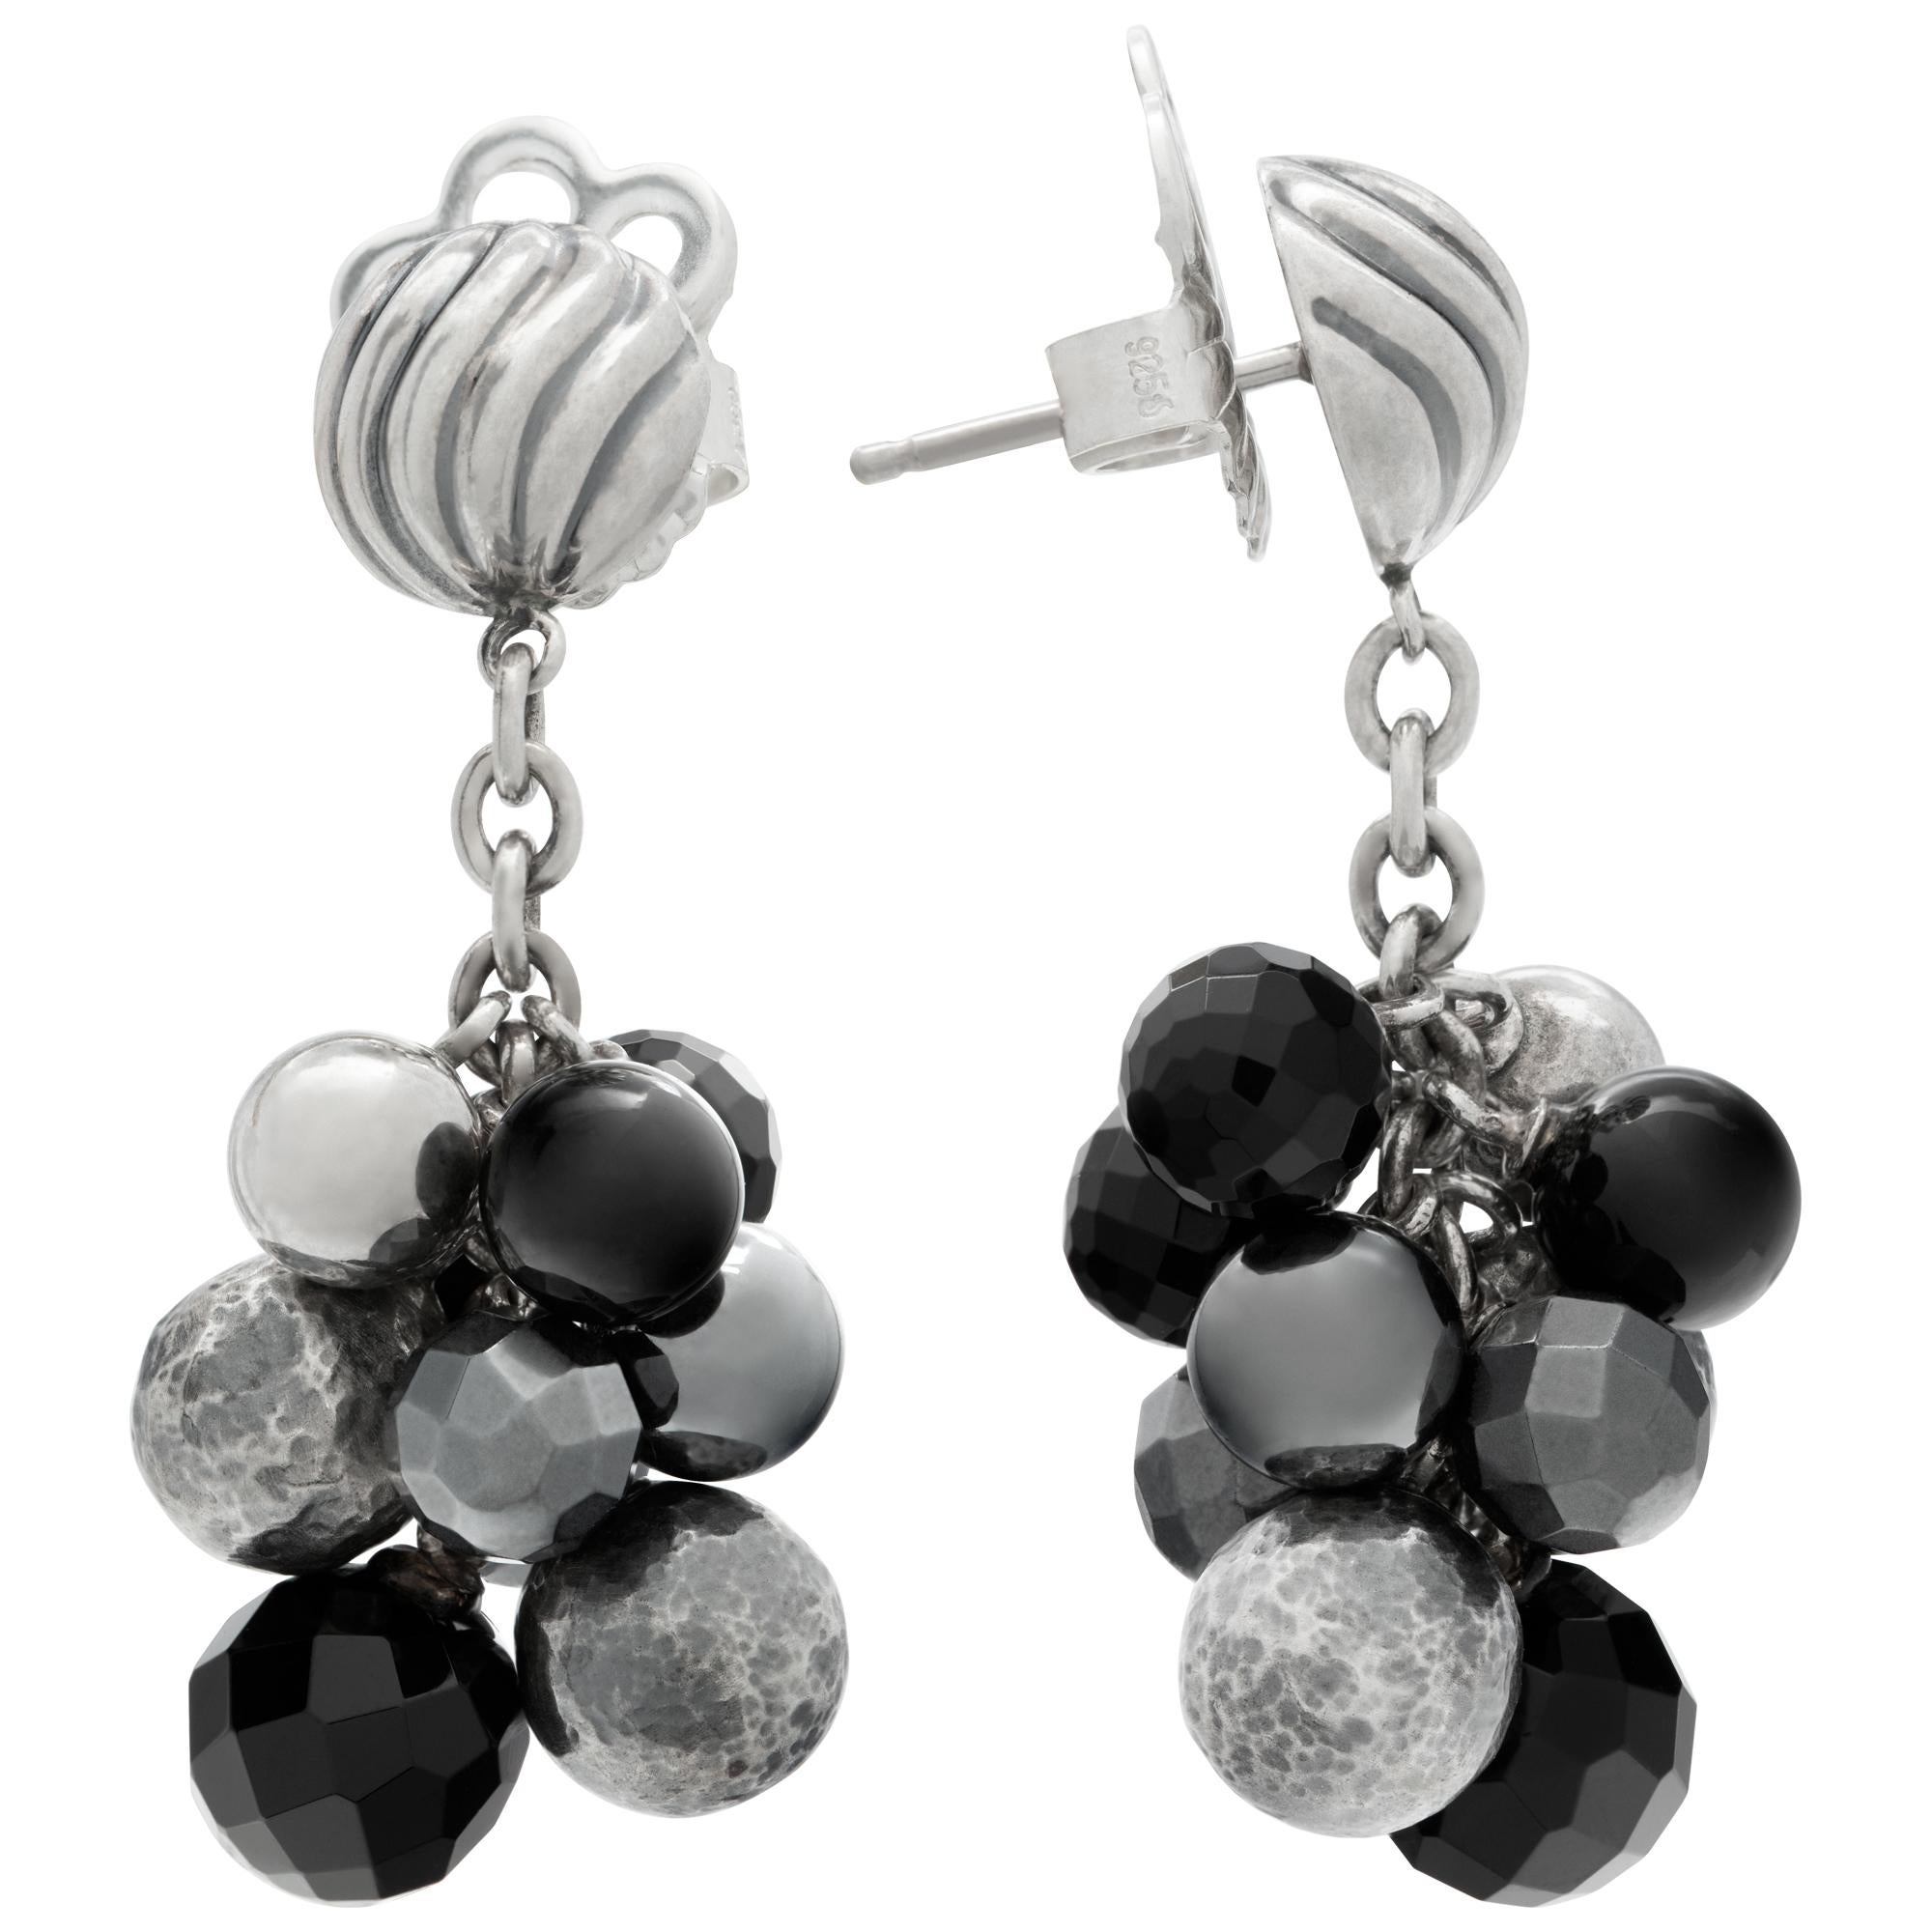 David Yurman earrings in sterling silver with sterling silver and onyx balls. Hanging length 1.57 inches.
